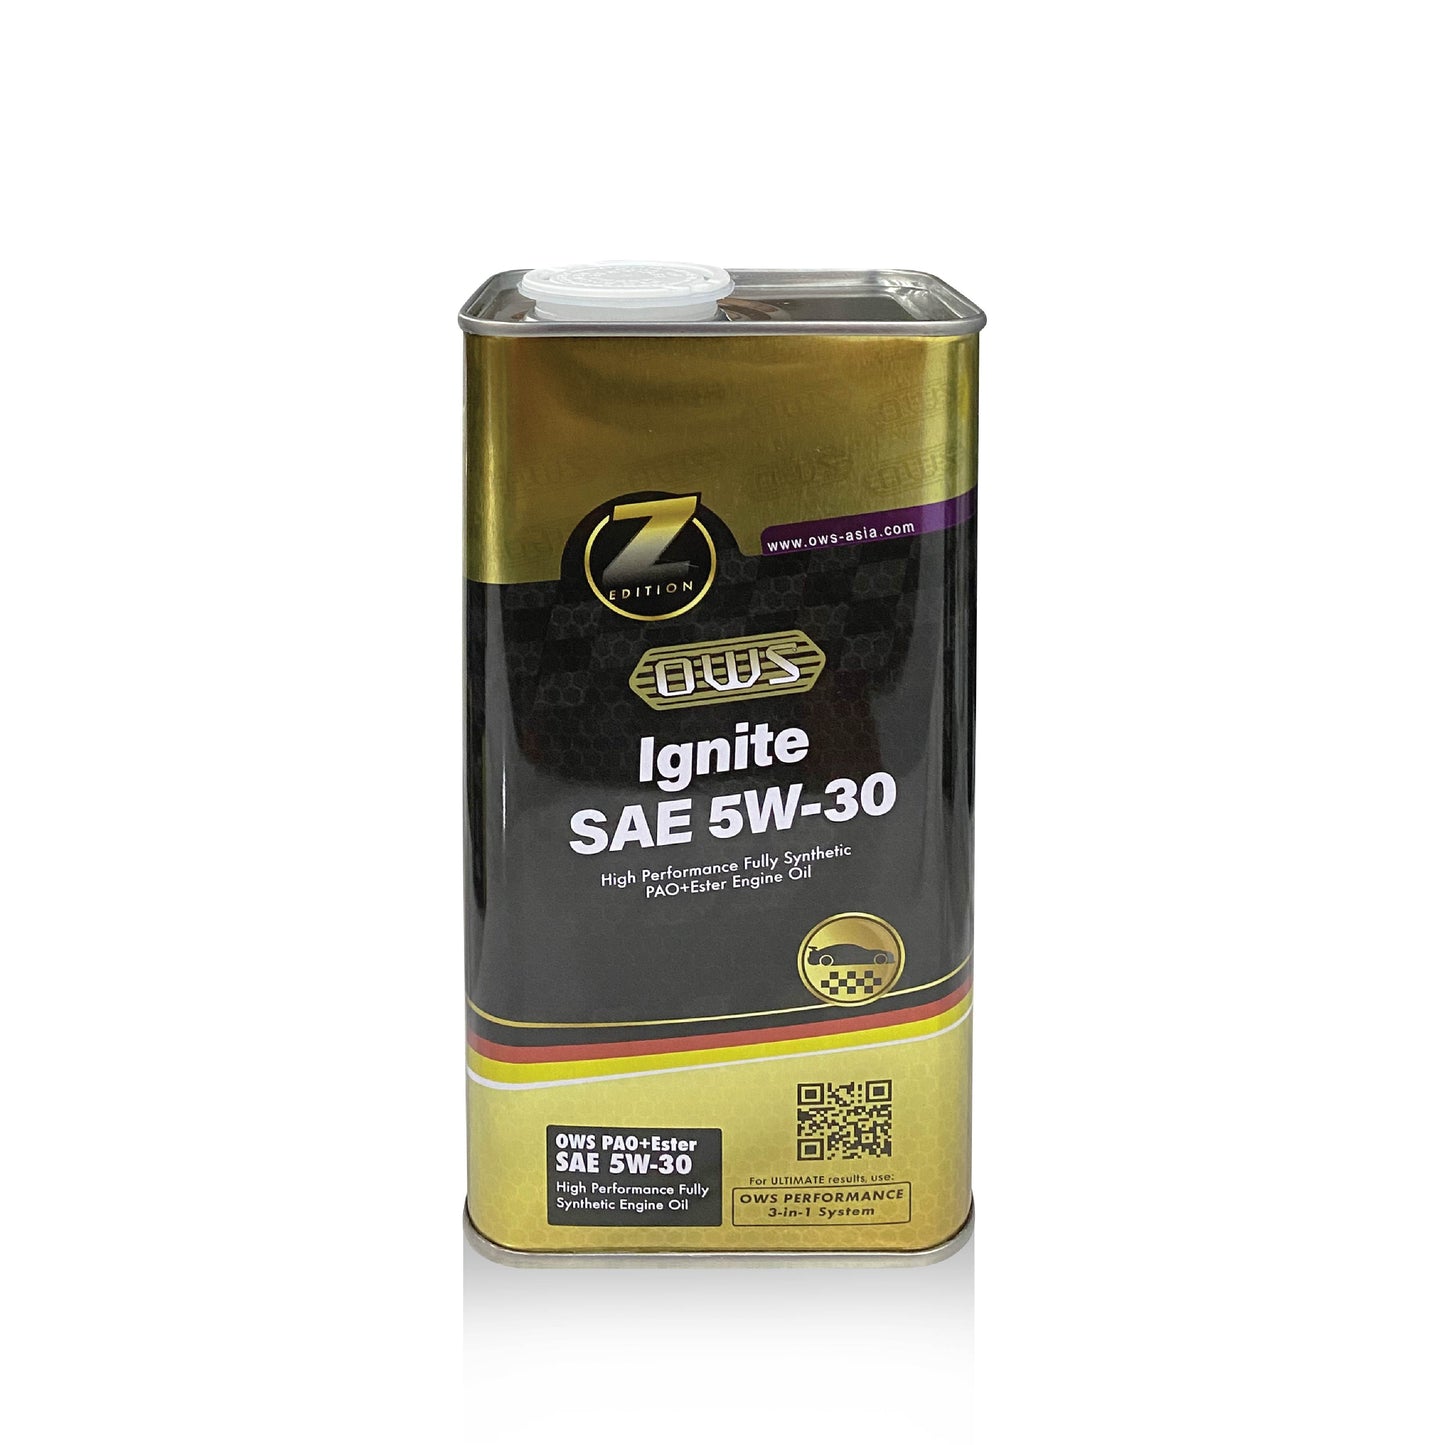 Ignite PAO+Ester High Performance Fully Synthetic Engine Oil 1L